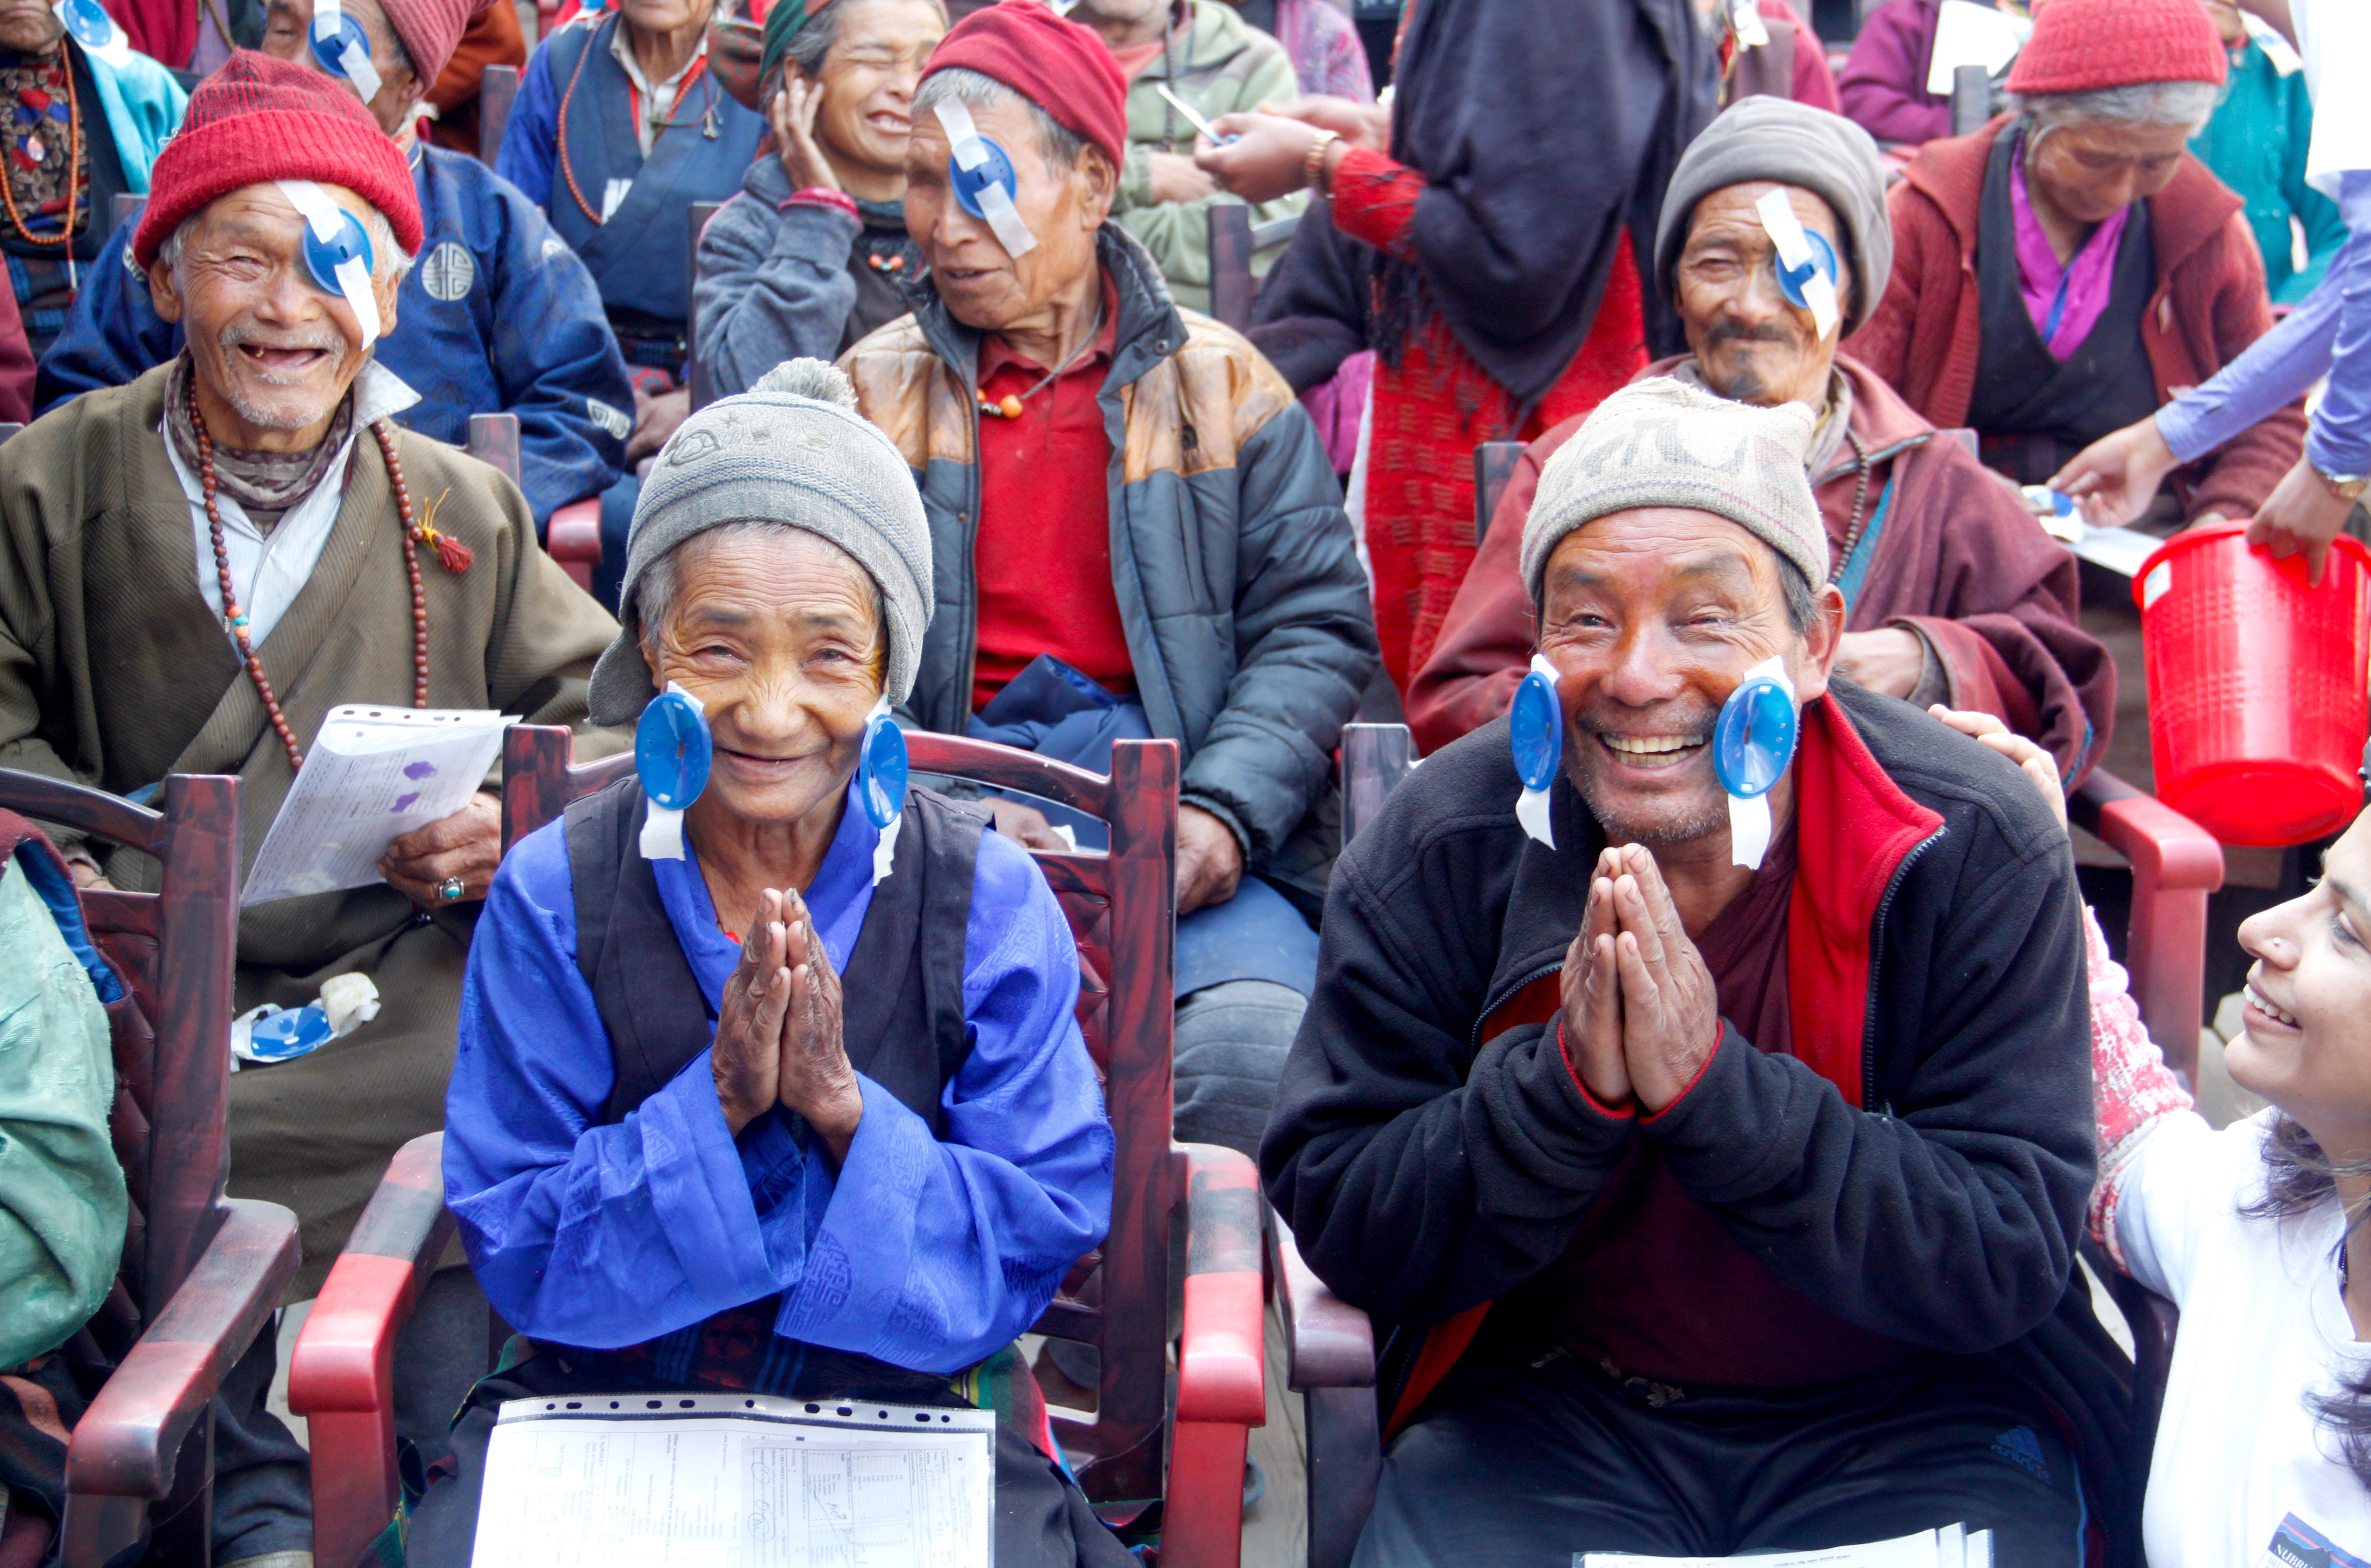 Villagers from Nepal’s Nubri Valley who can now see after being partially or completely blind for years thanks to free eye clinics set up as part of a language preservation project. Photo: Cathryn Donohue